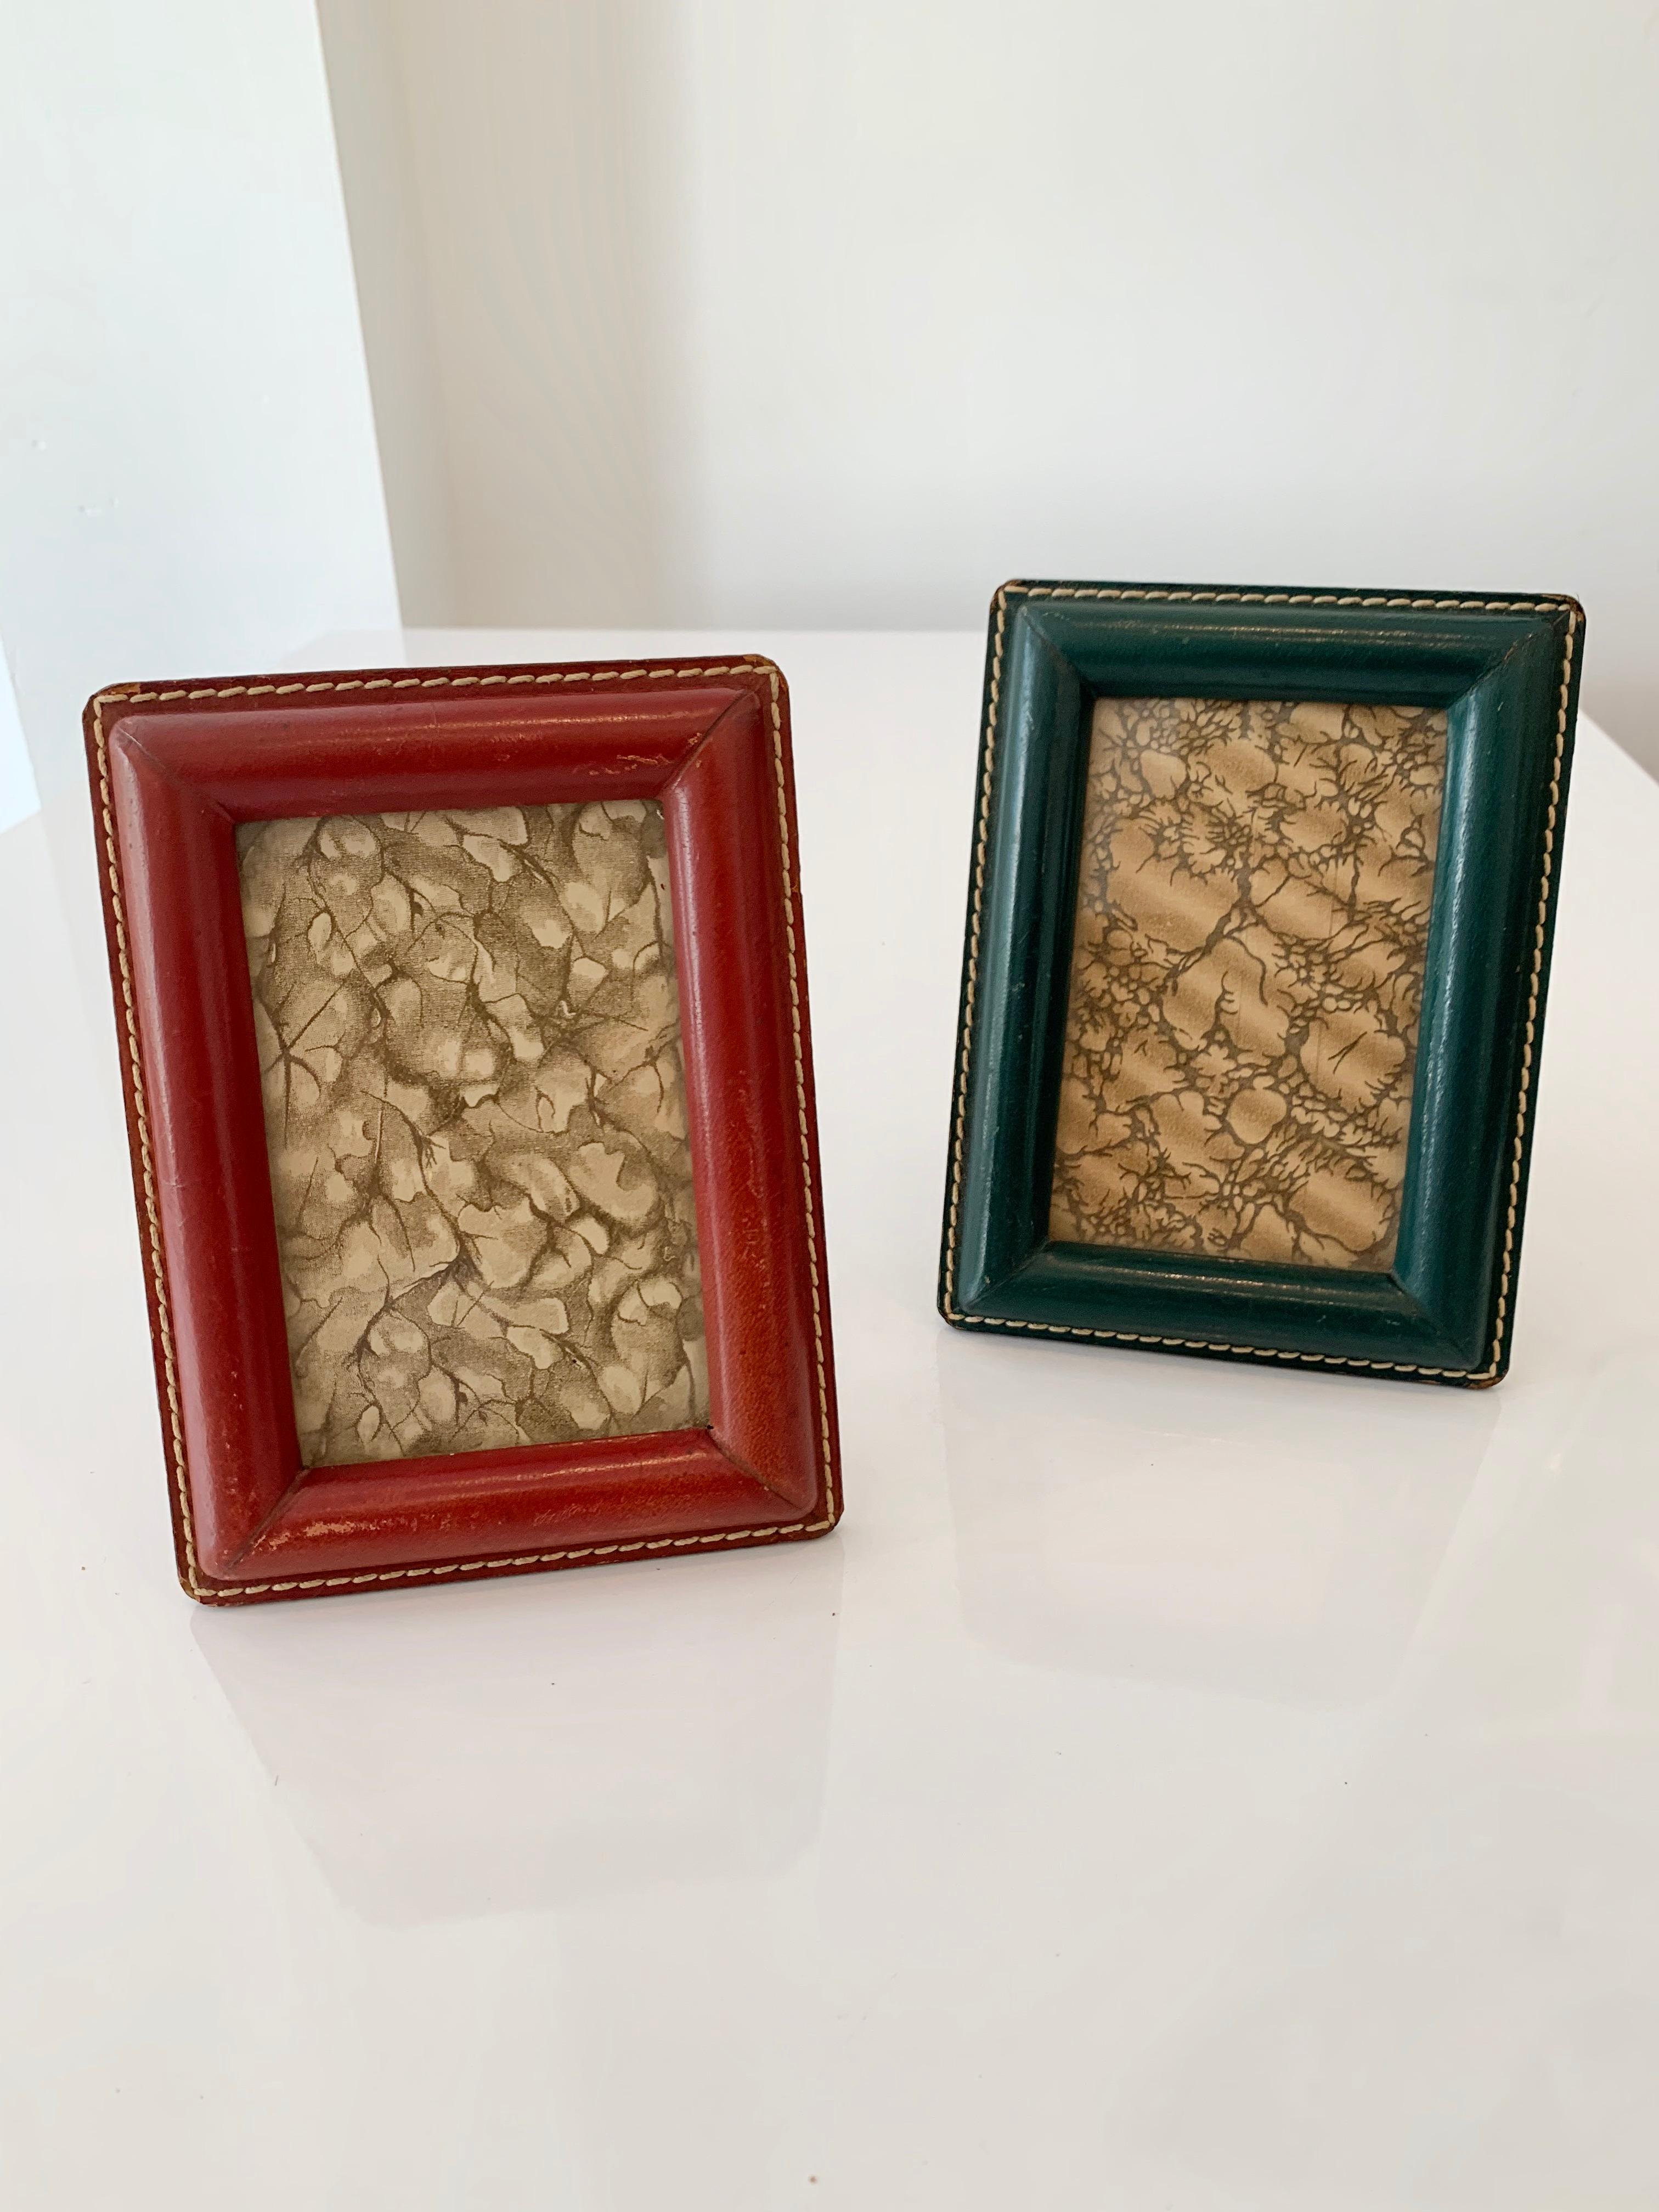 Handsome French leather picture frames by Jacques Adnet. One in green and the other in red. Signature Adnet contrast stitching. Very good vintage condition. Great patina and age to leather. Priced as a pair.